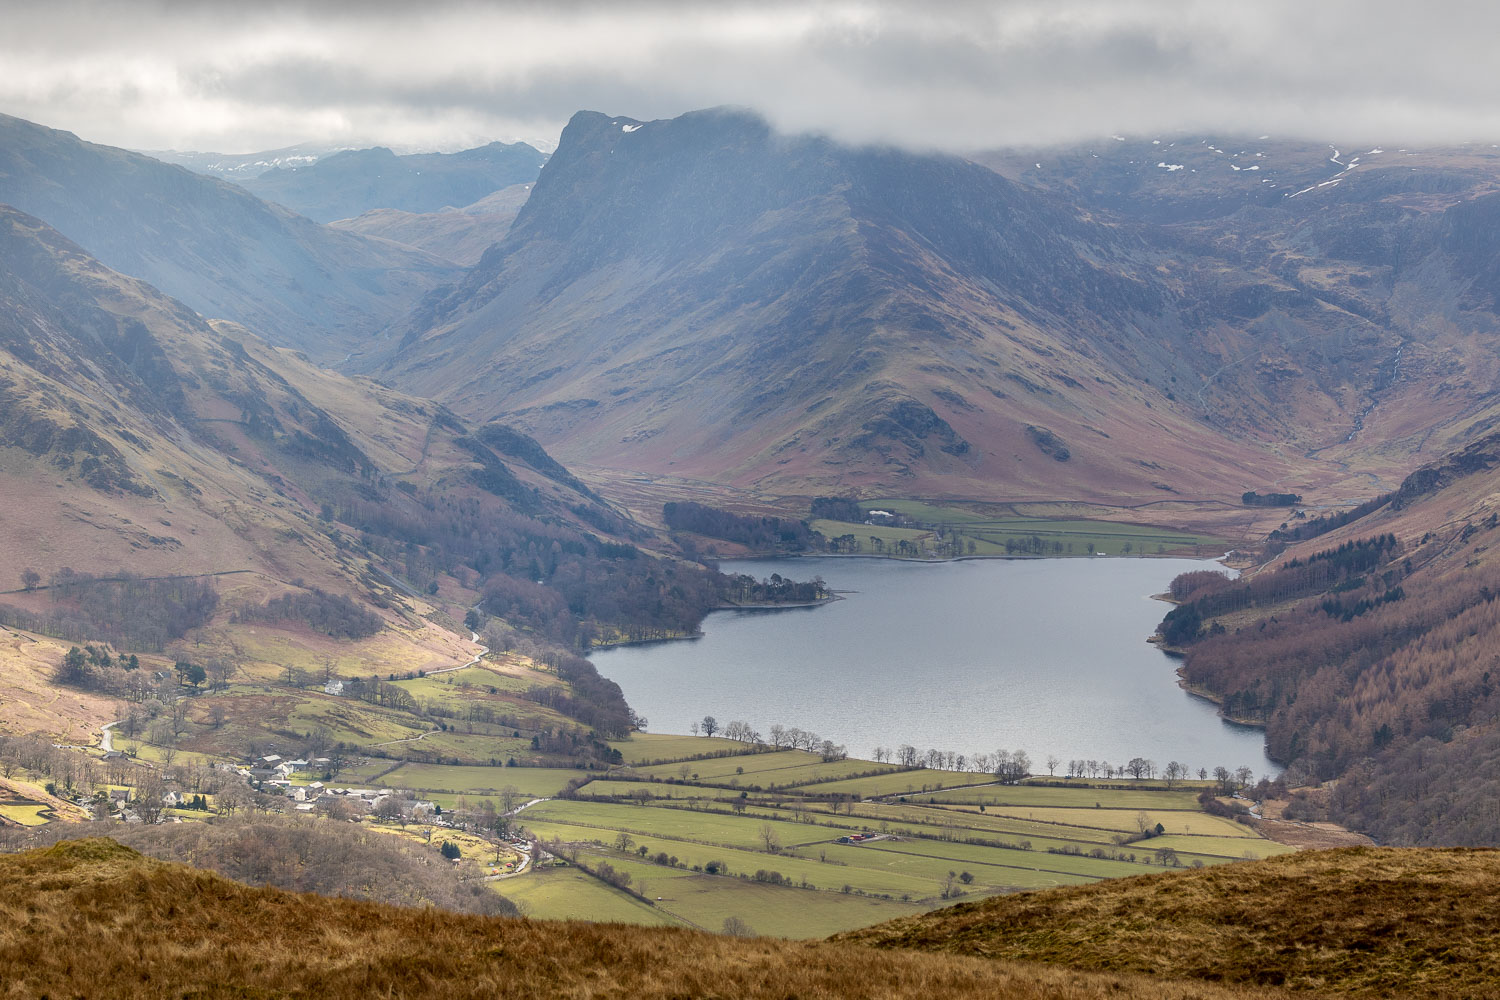 Buttermere and Fleetwith Pike